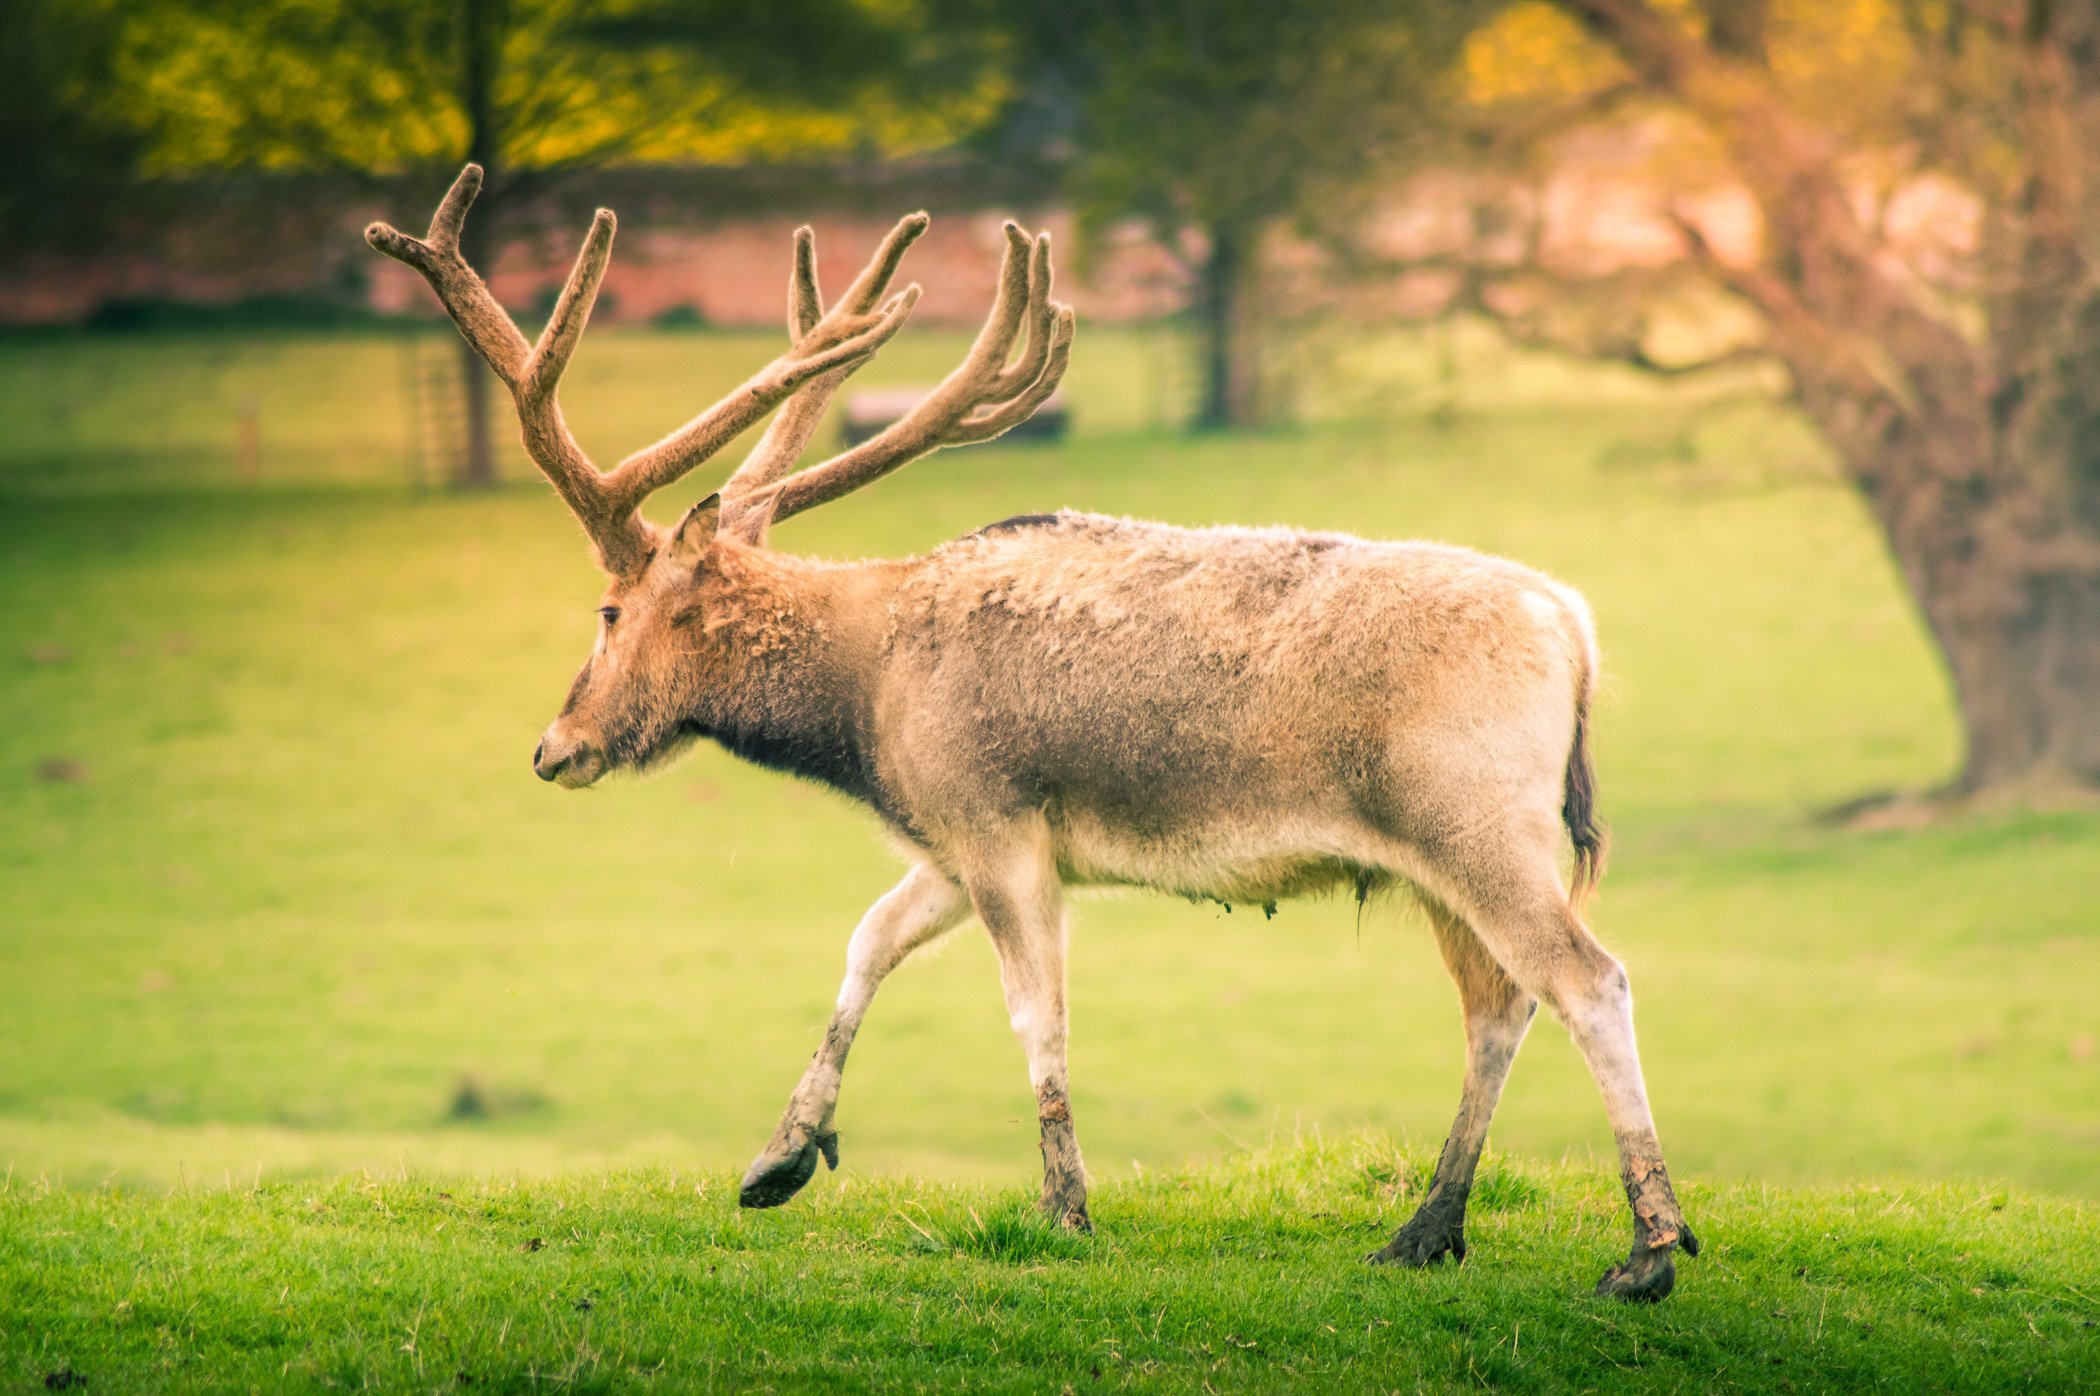 A large stag at Woburn Abbey